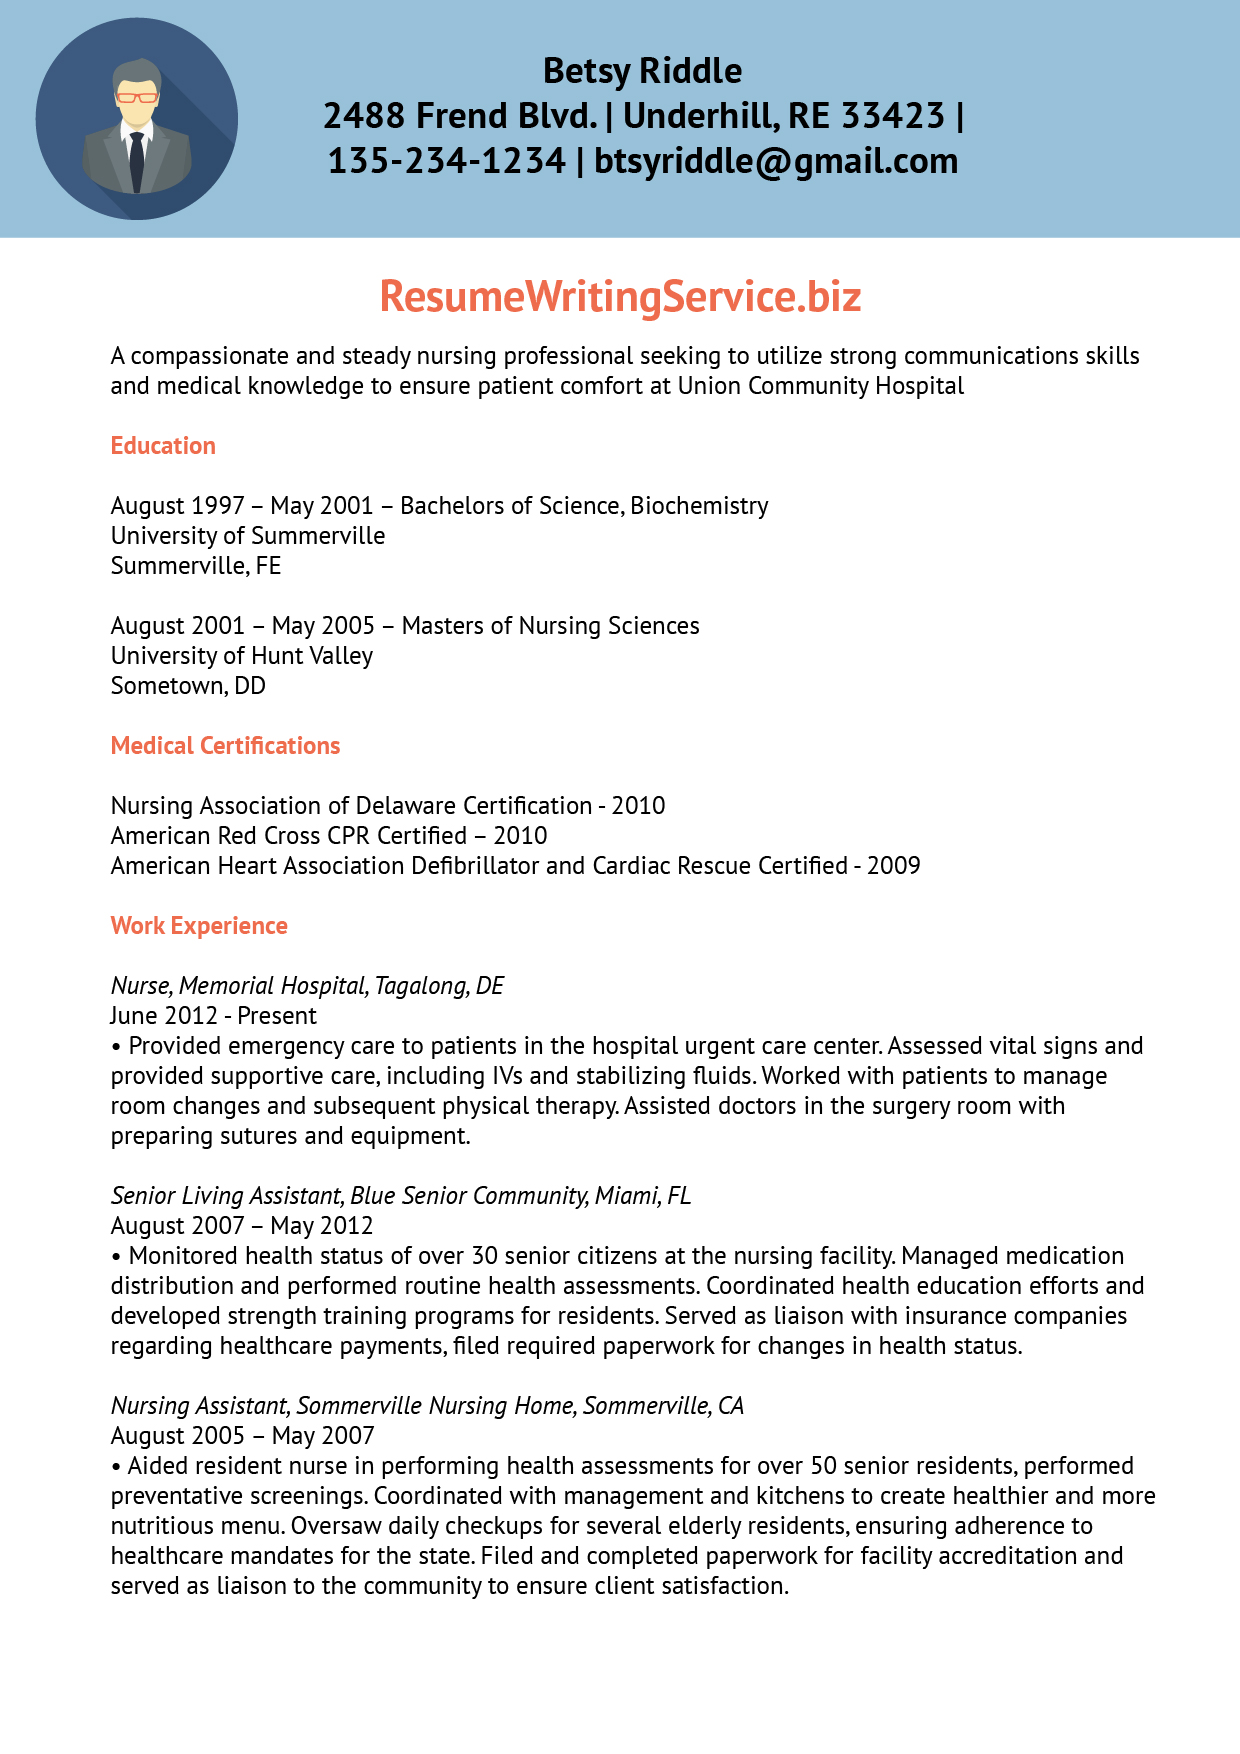 Improve your career prospects with professional CV writing services